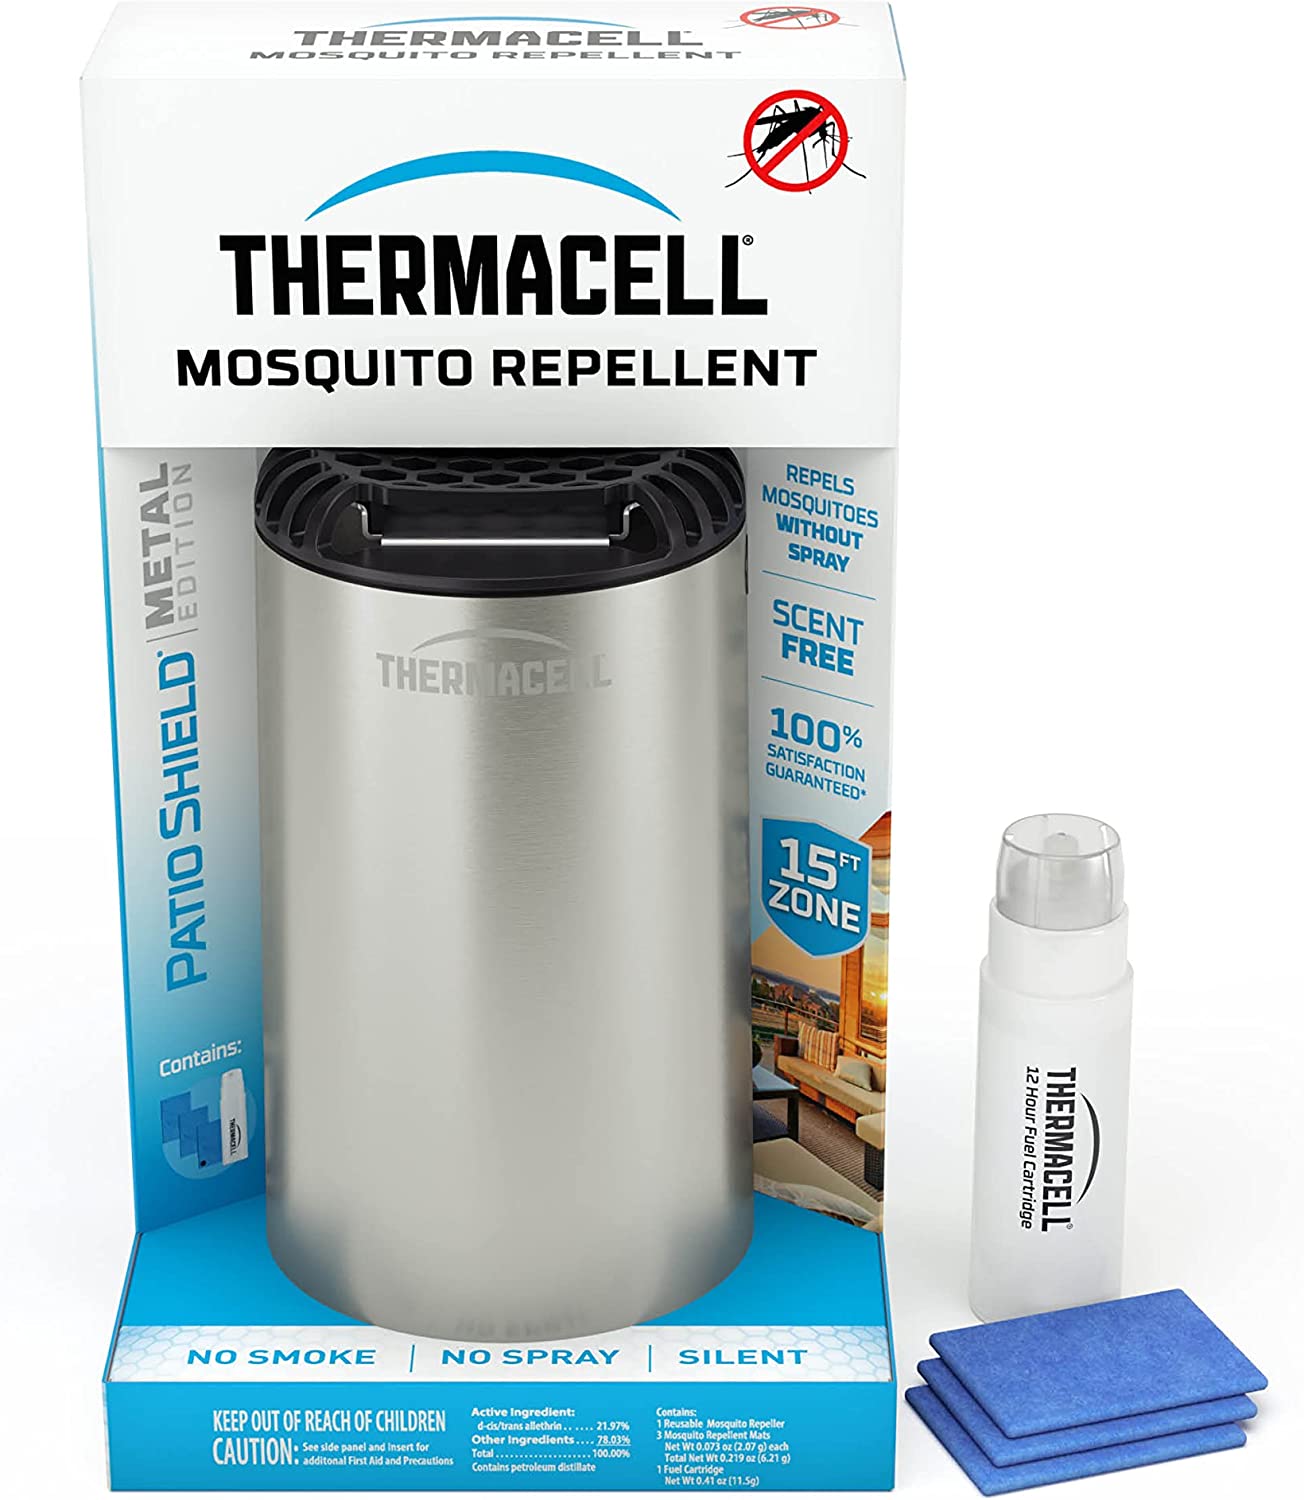 Reducing Mosquitos Safely